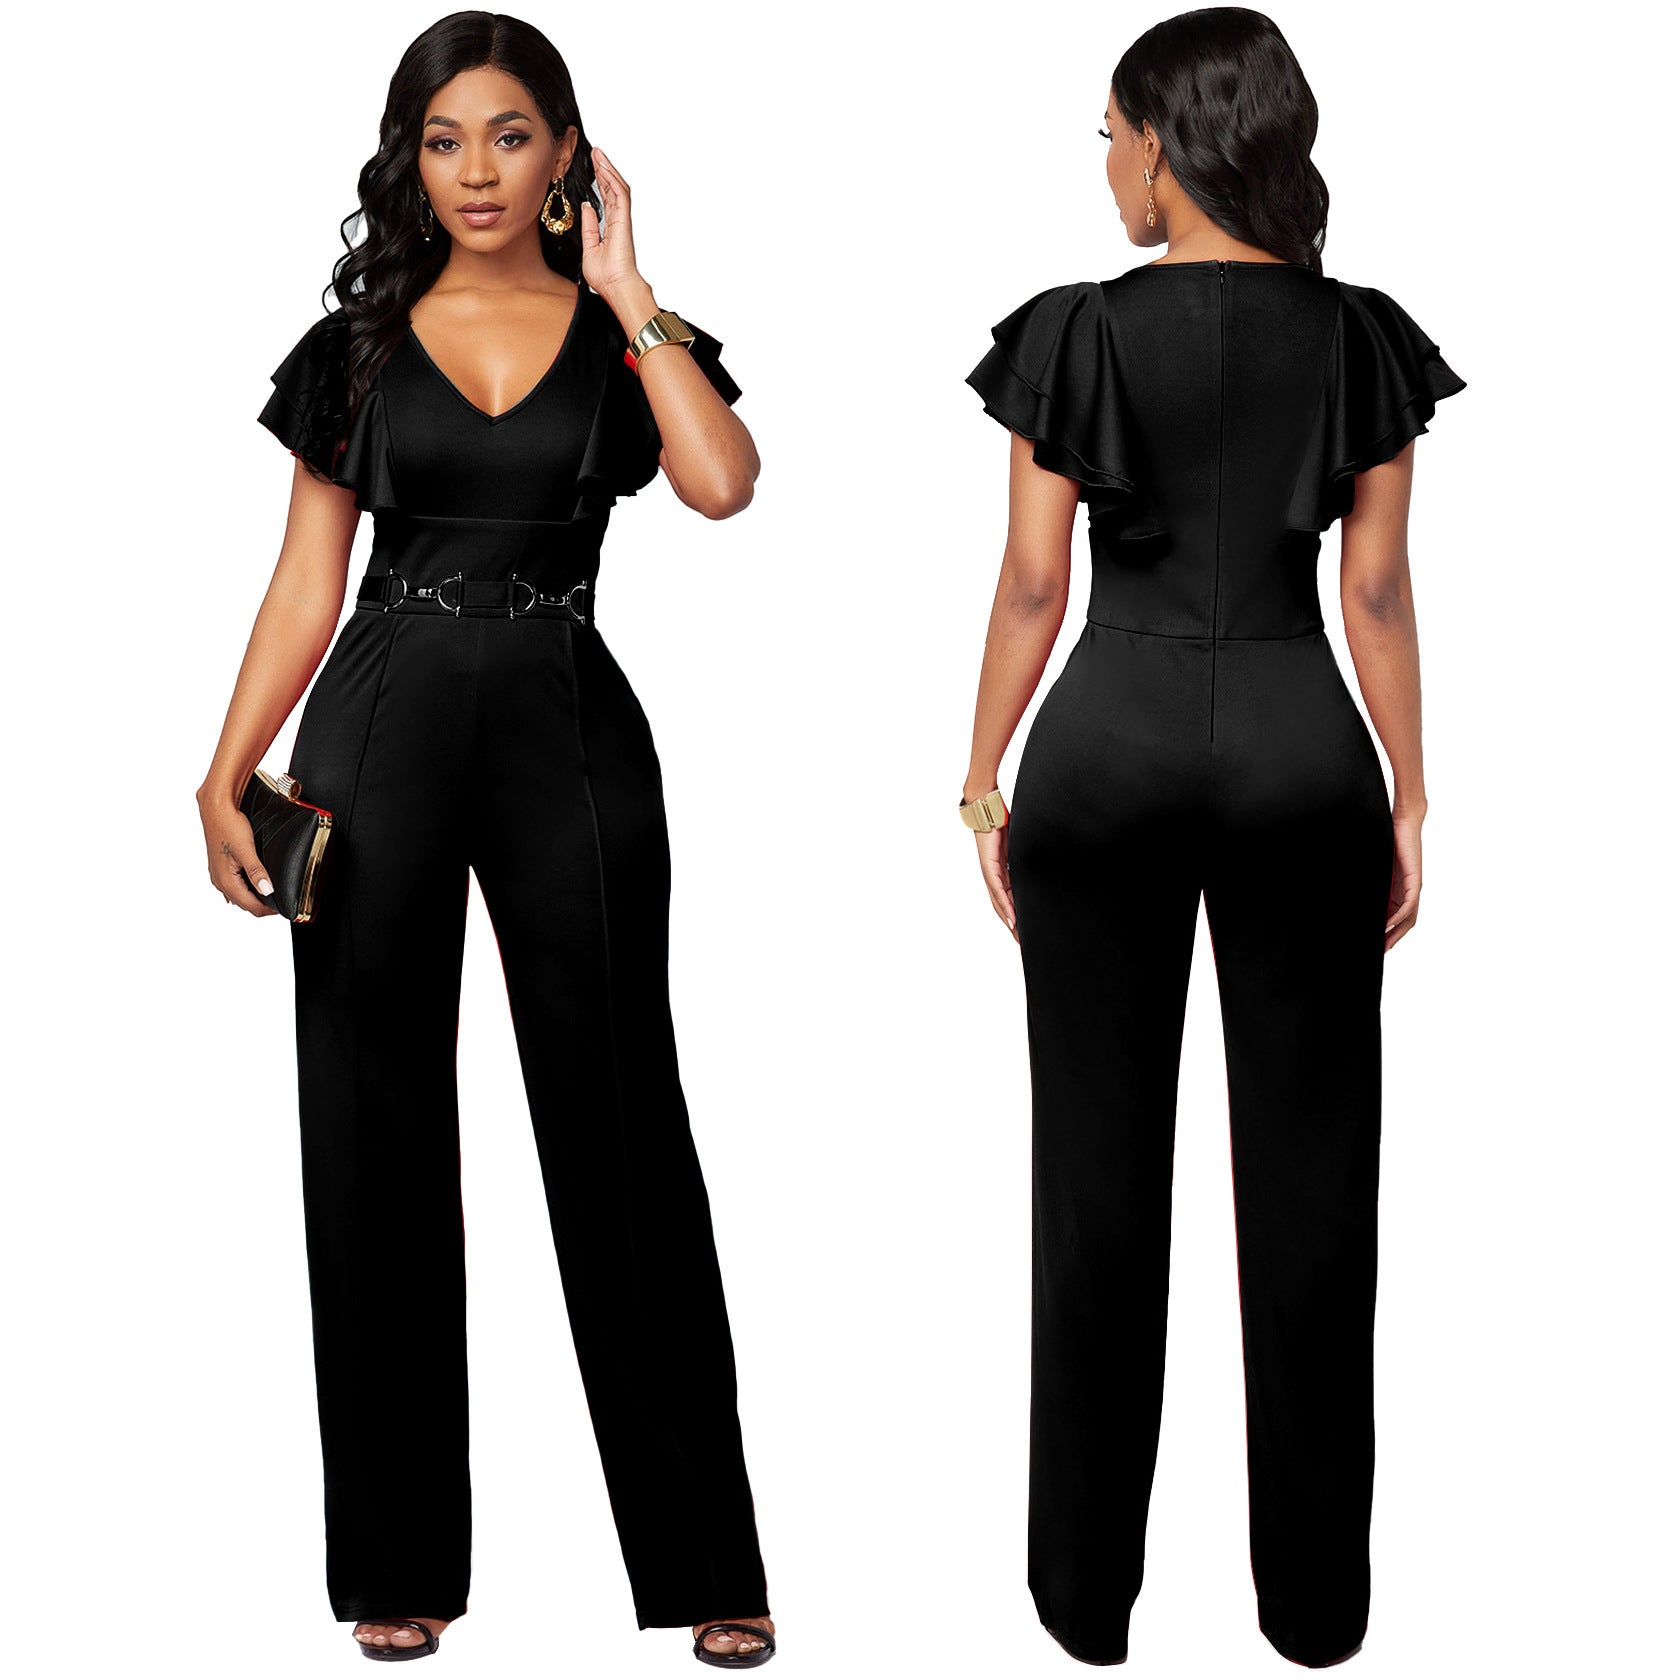 Sexy Casual Fashion Long-sleeved V-neck Women's Jumpsuit